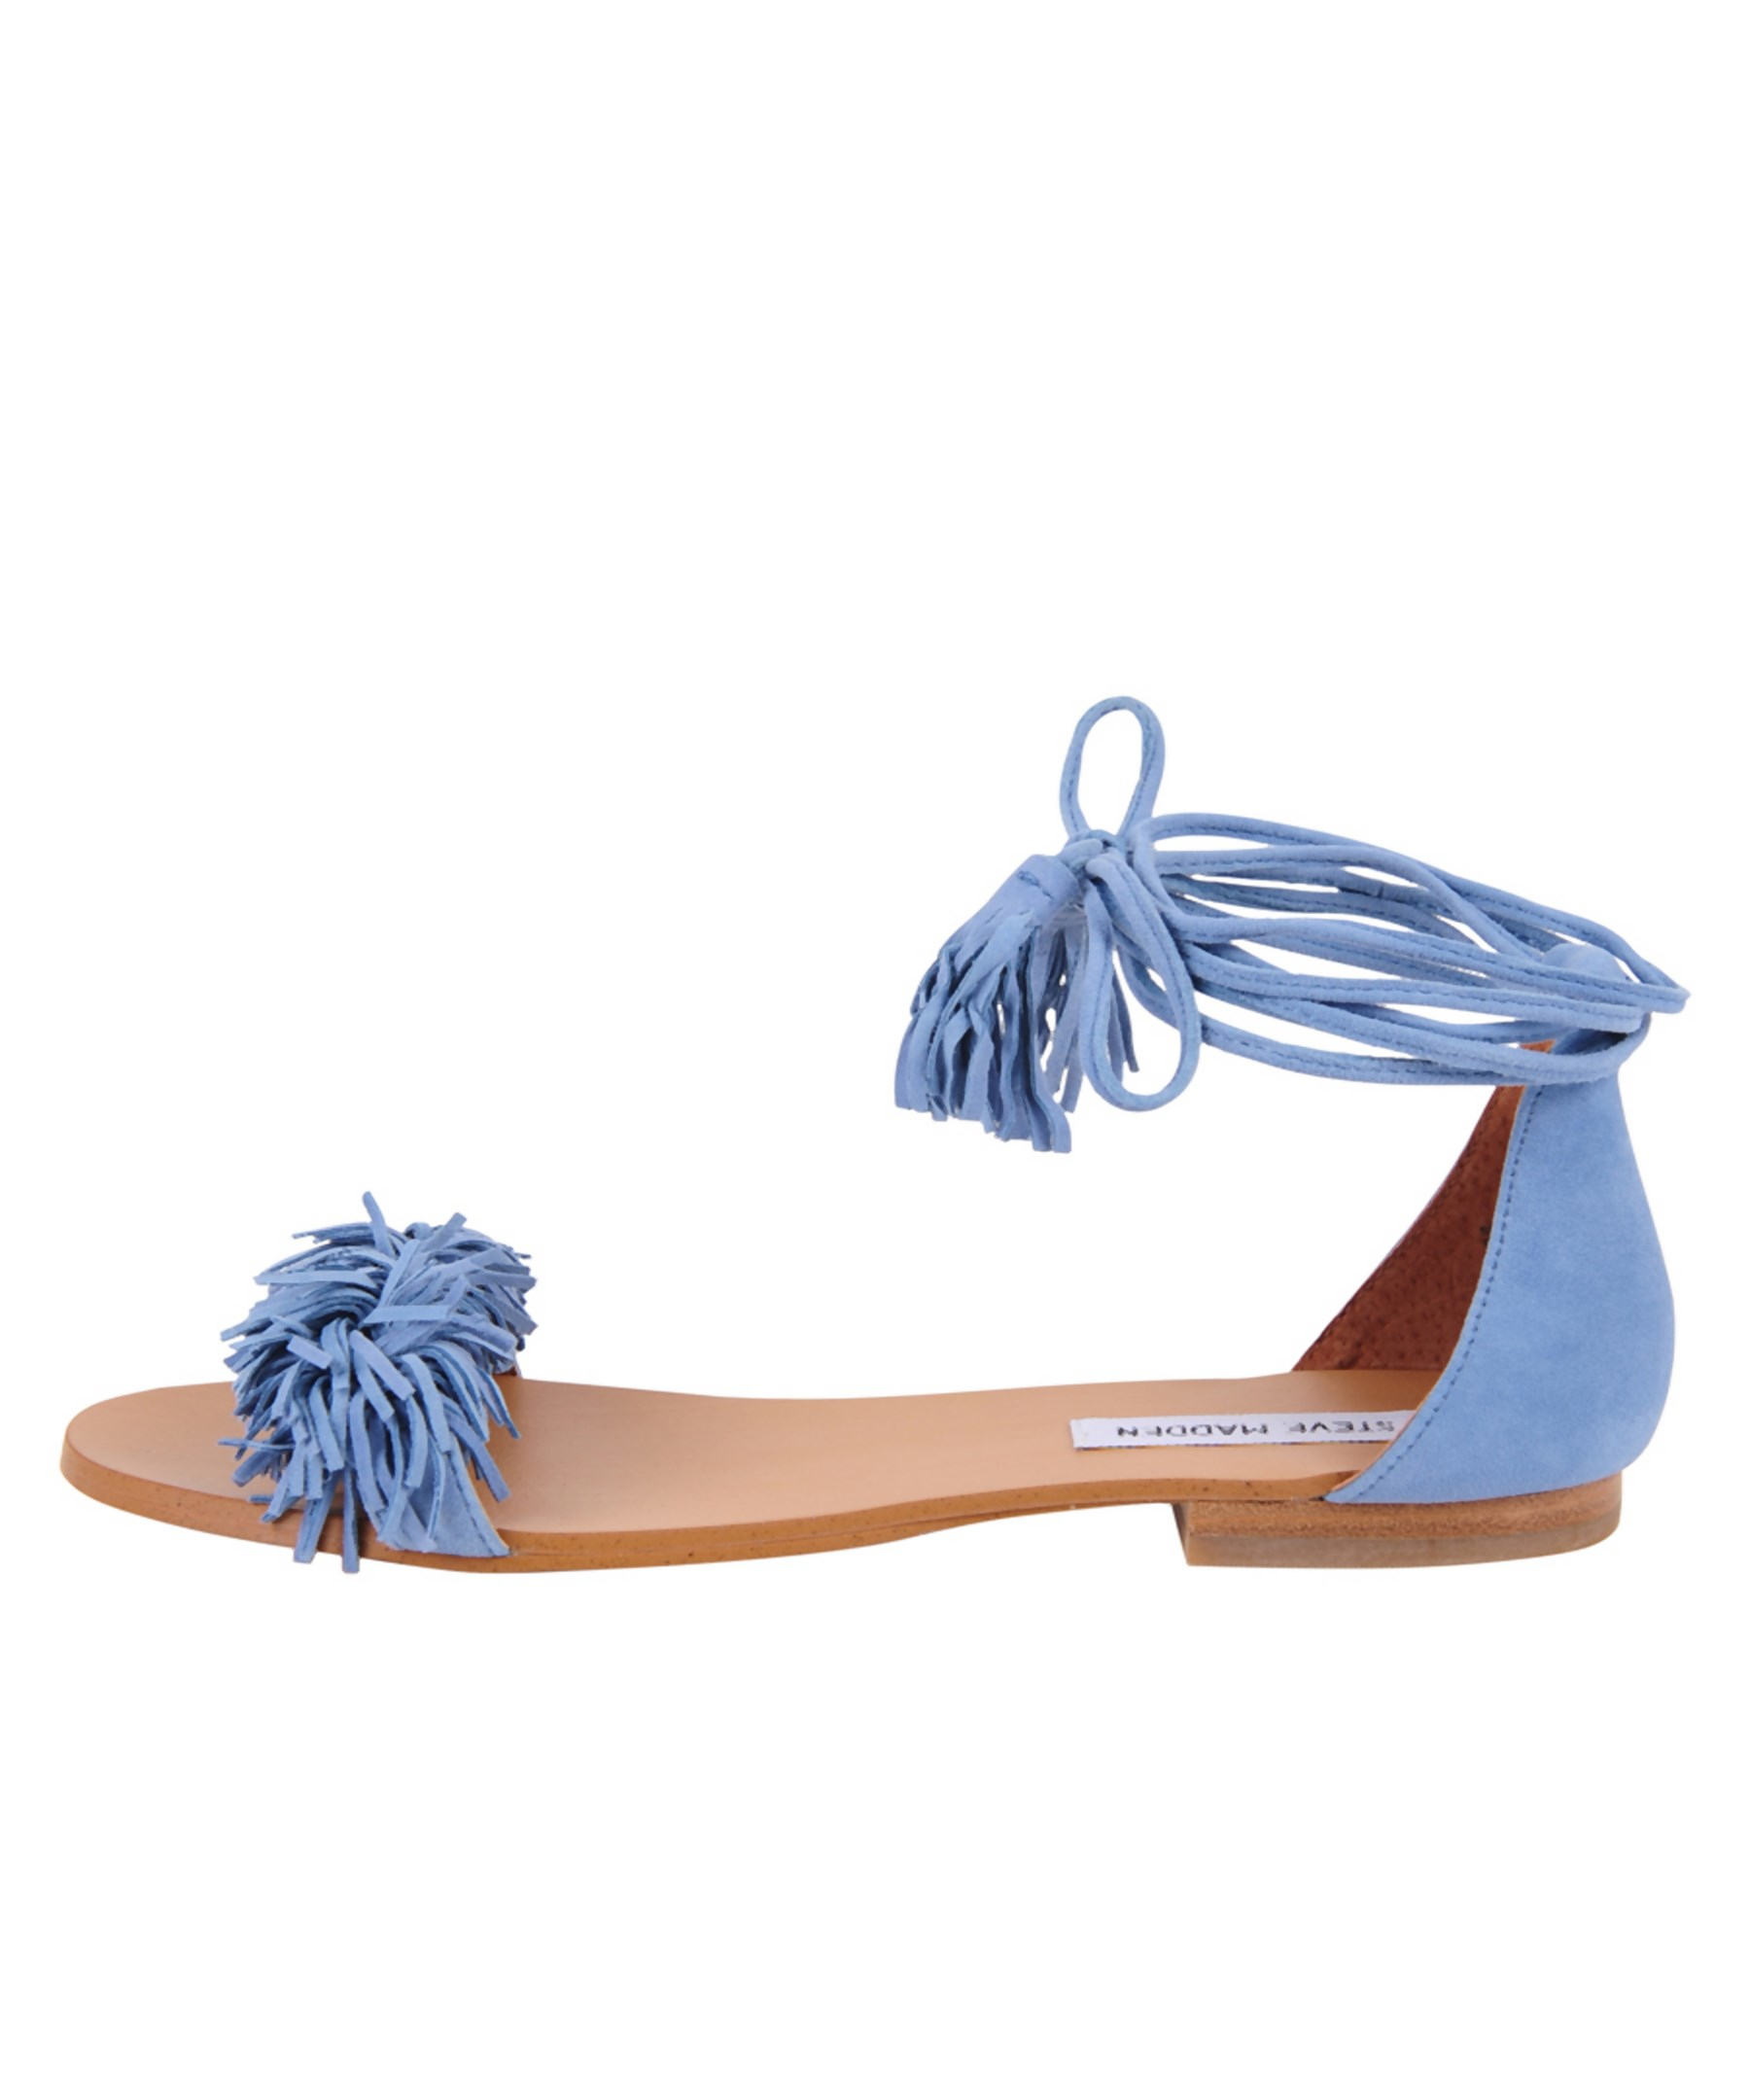 Lyst - Steve Madden Sweetyy Suede Sandals in Blue